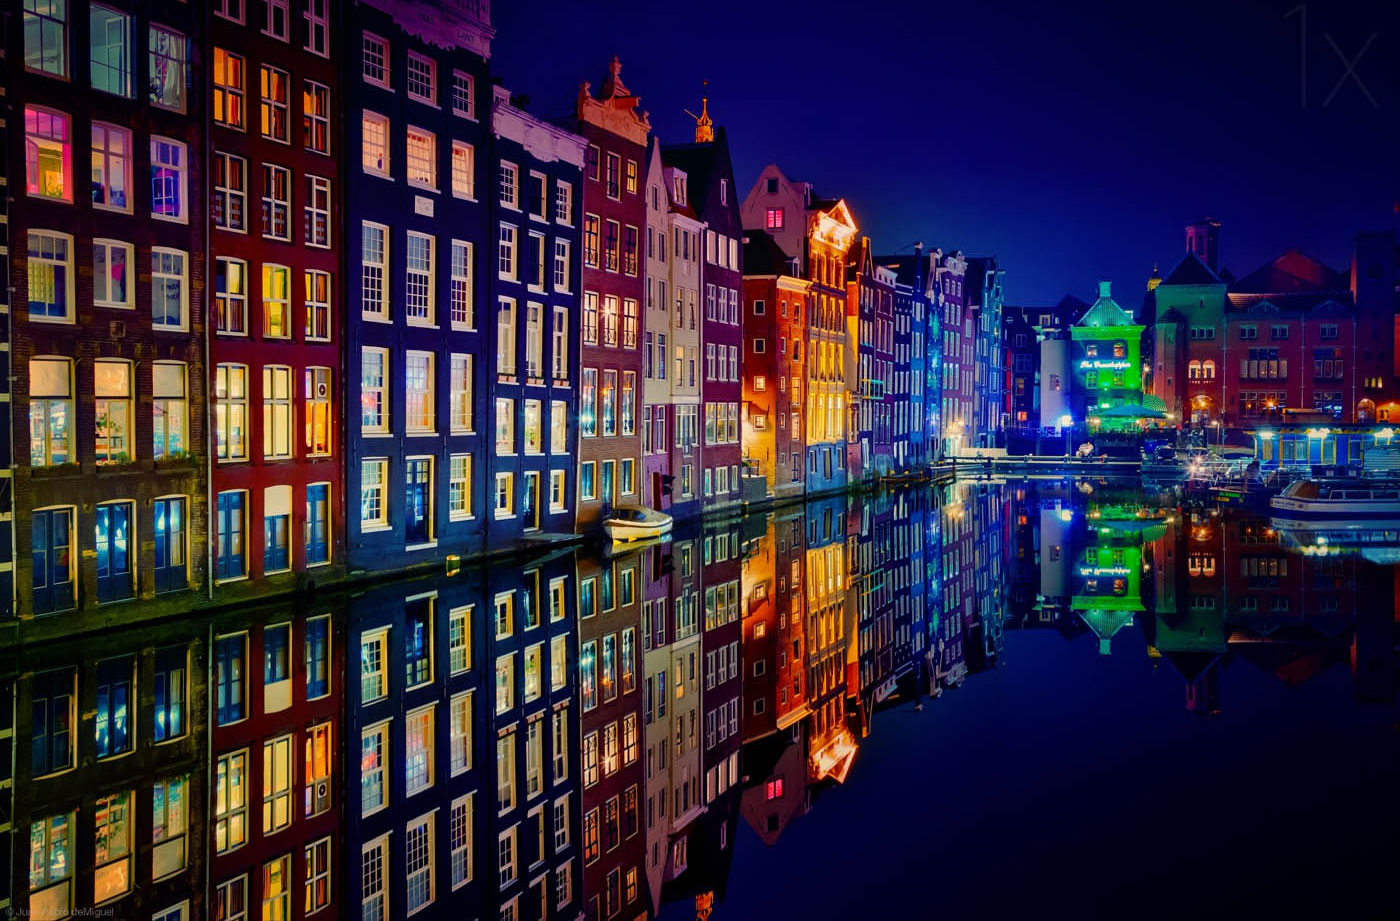 reflection photography amsterdam by juan pablo demiguel